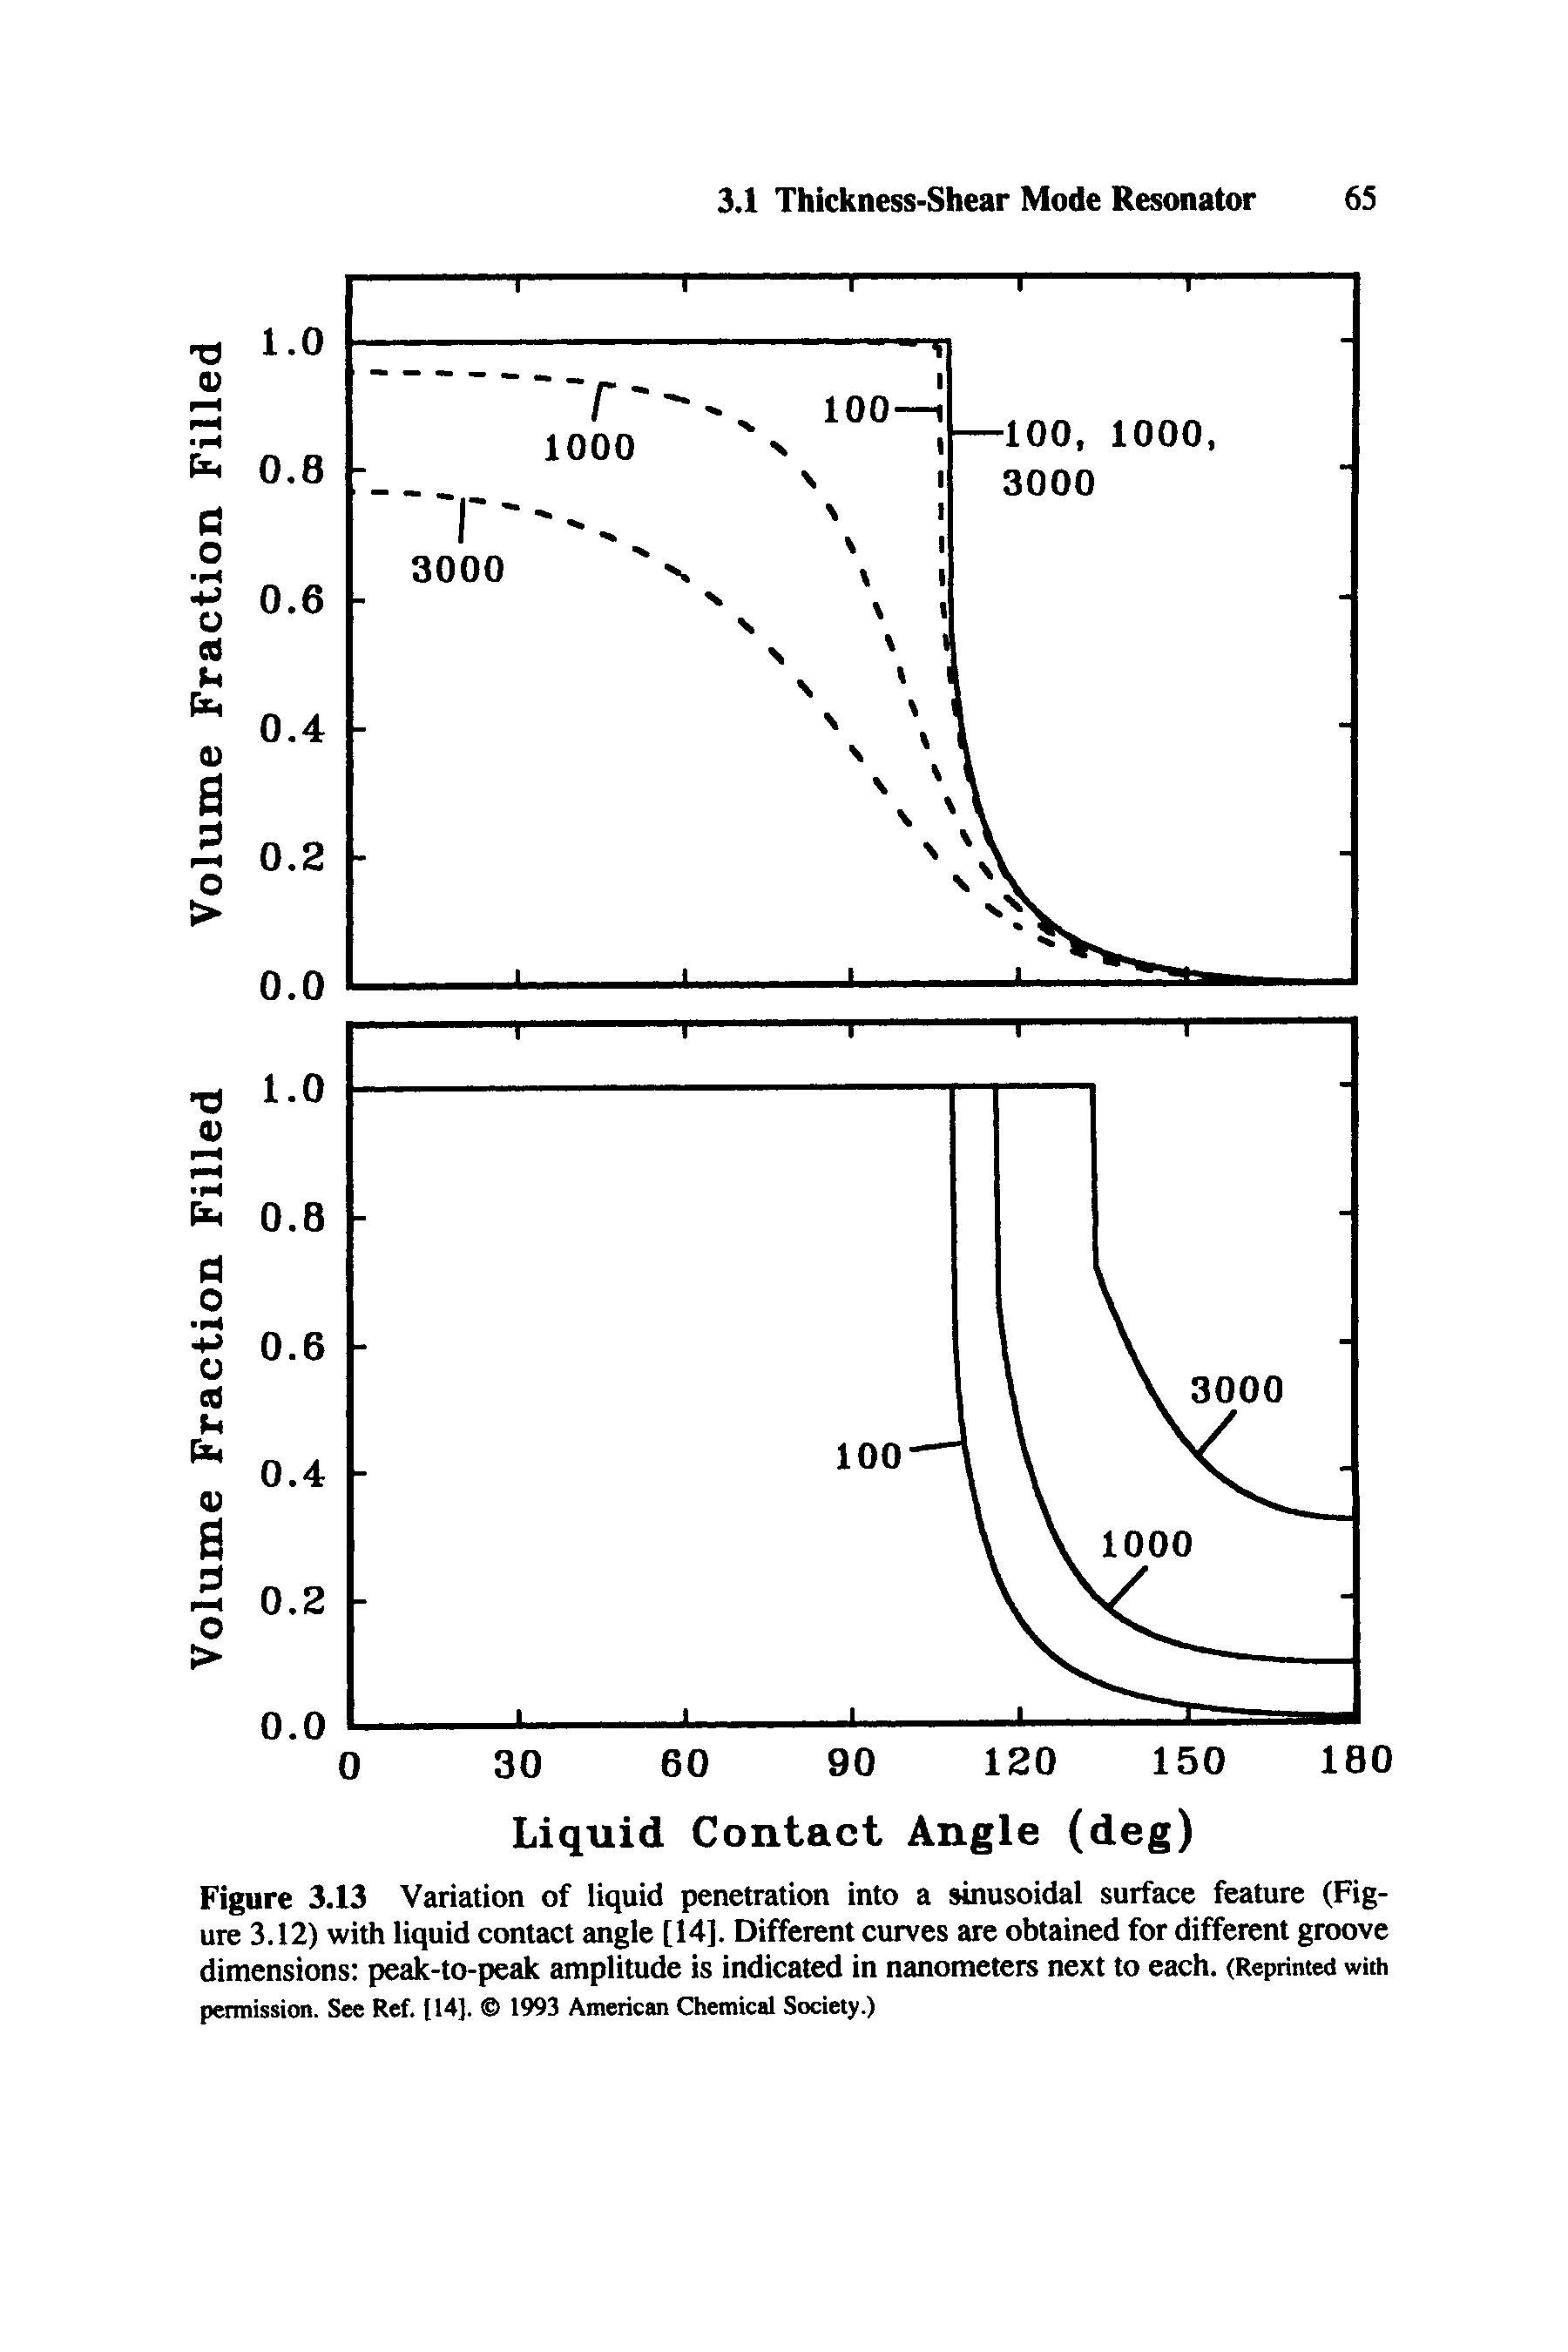 Figure 3.13 Variation of liquid penetration into a sinusoidal surface feature (Figure 3.12) with liquid contact angle [14]. Different curves are obtained for different groove dimensions peak-to-peak amplitude is indicated in nanometers next to each. (Reprinted with pramission. See Ref. 114]. 1993 American Chemical Society.)...